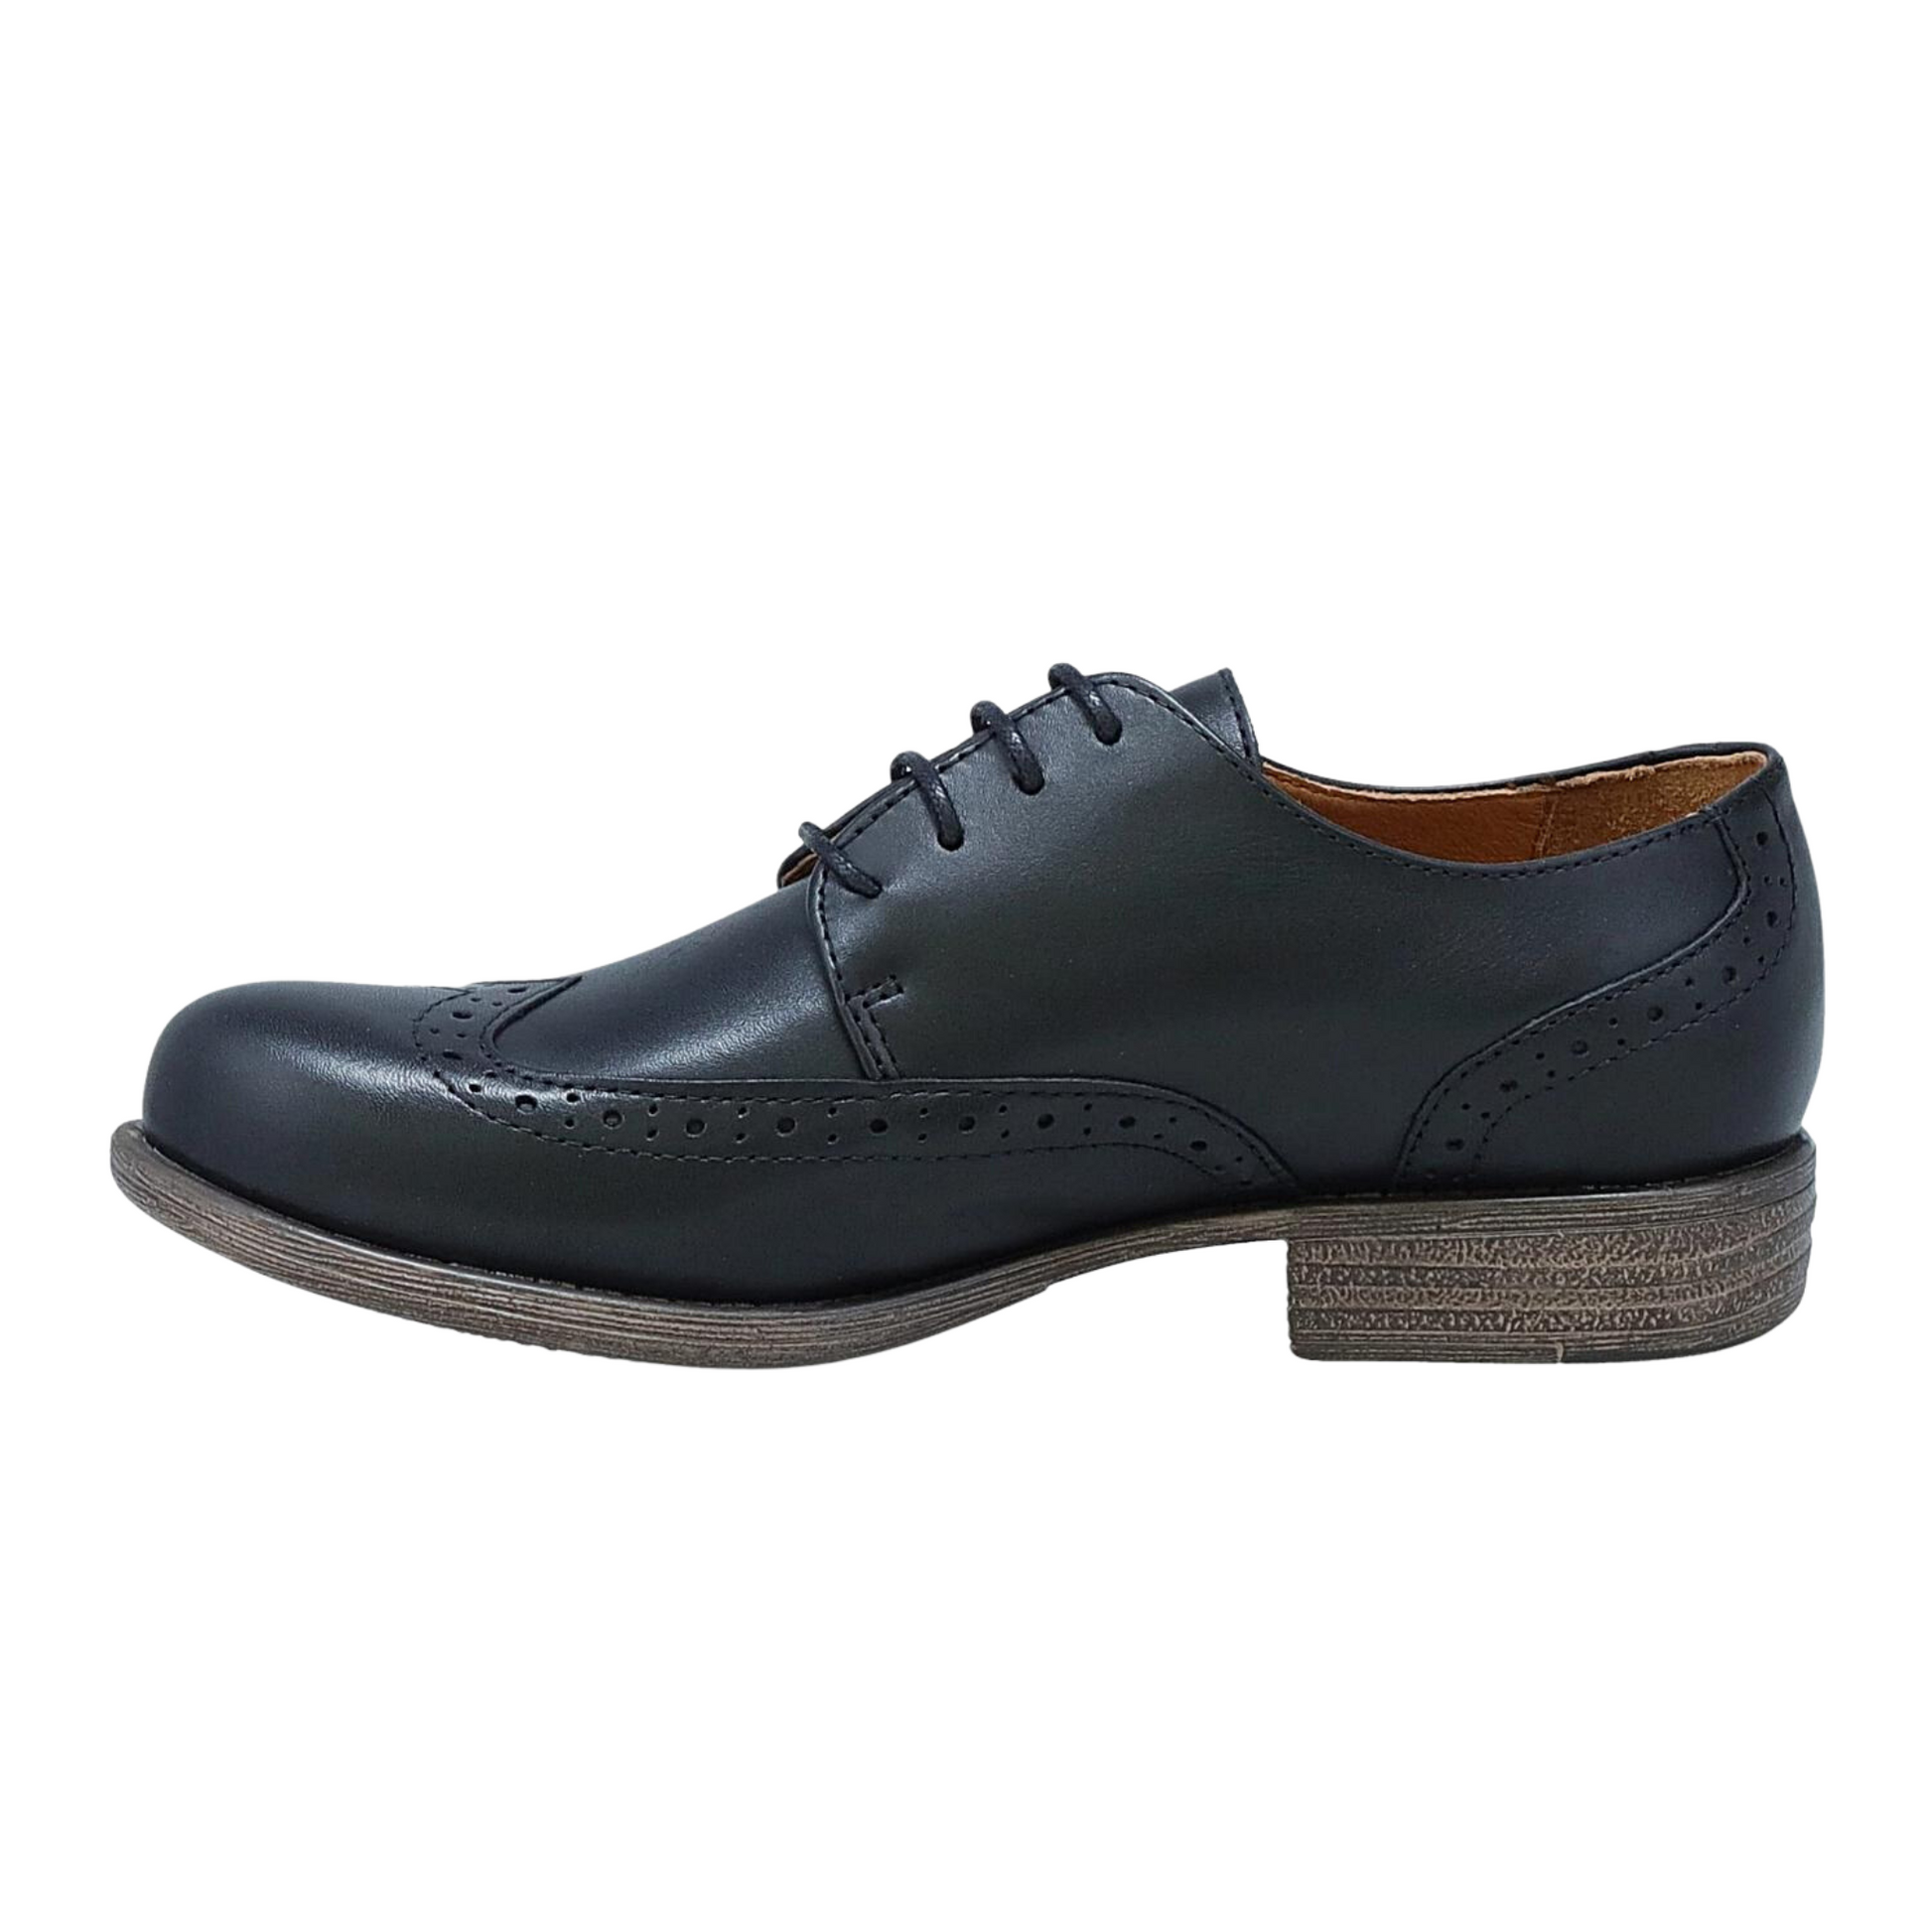 Left side profile of the Miz Mooz Luther Shoe in the colour Black.